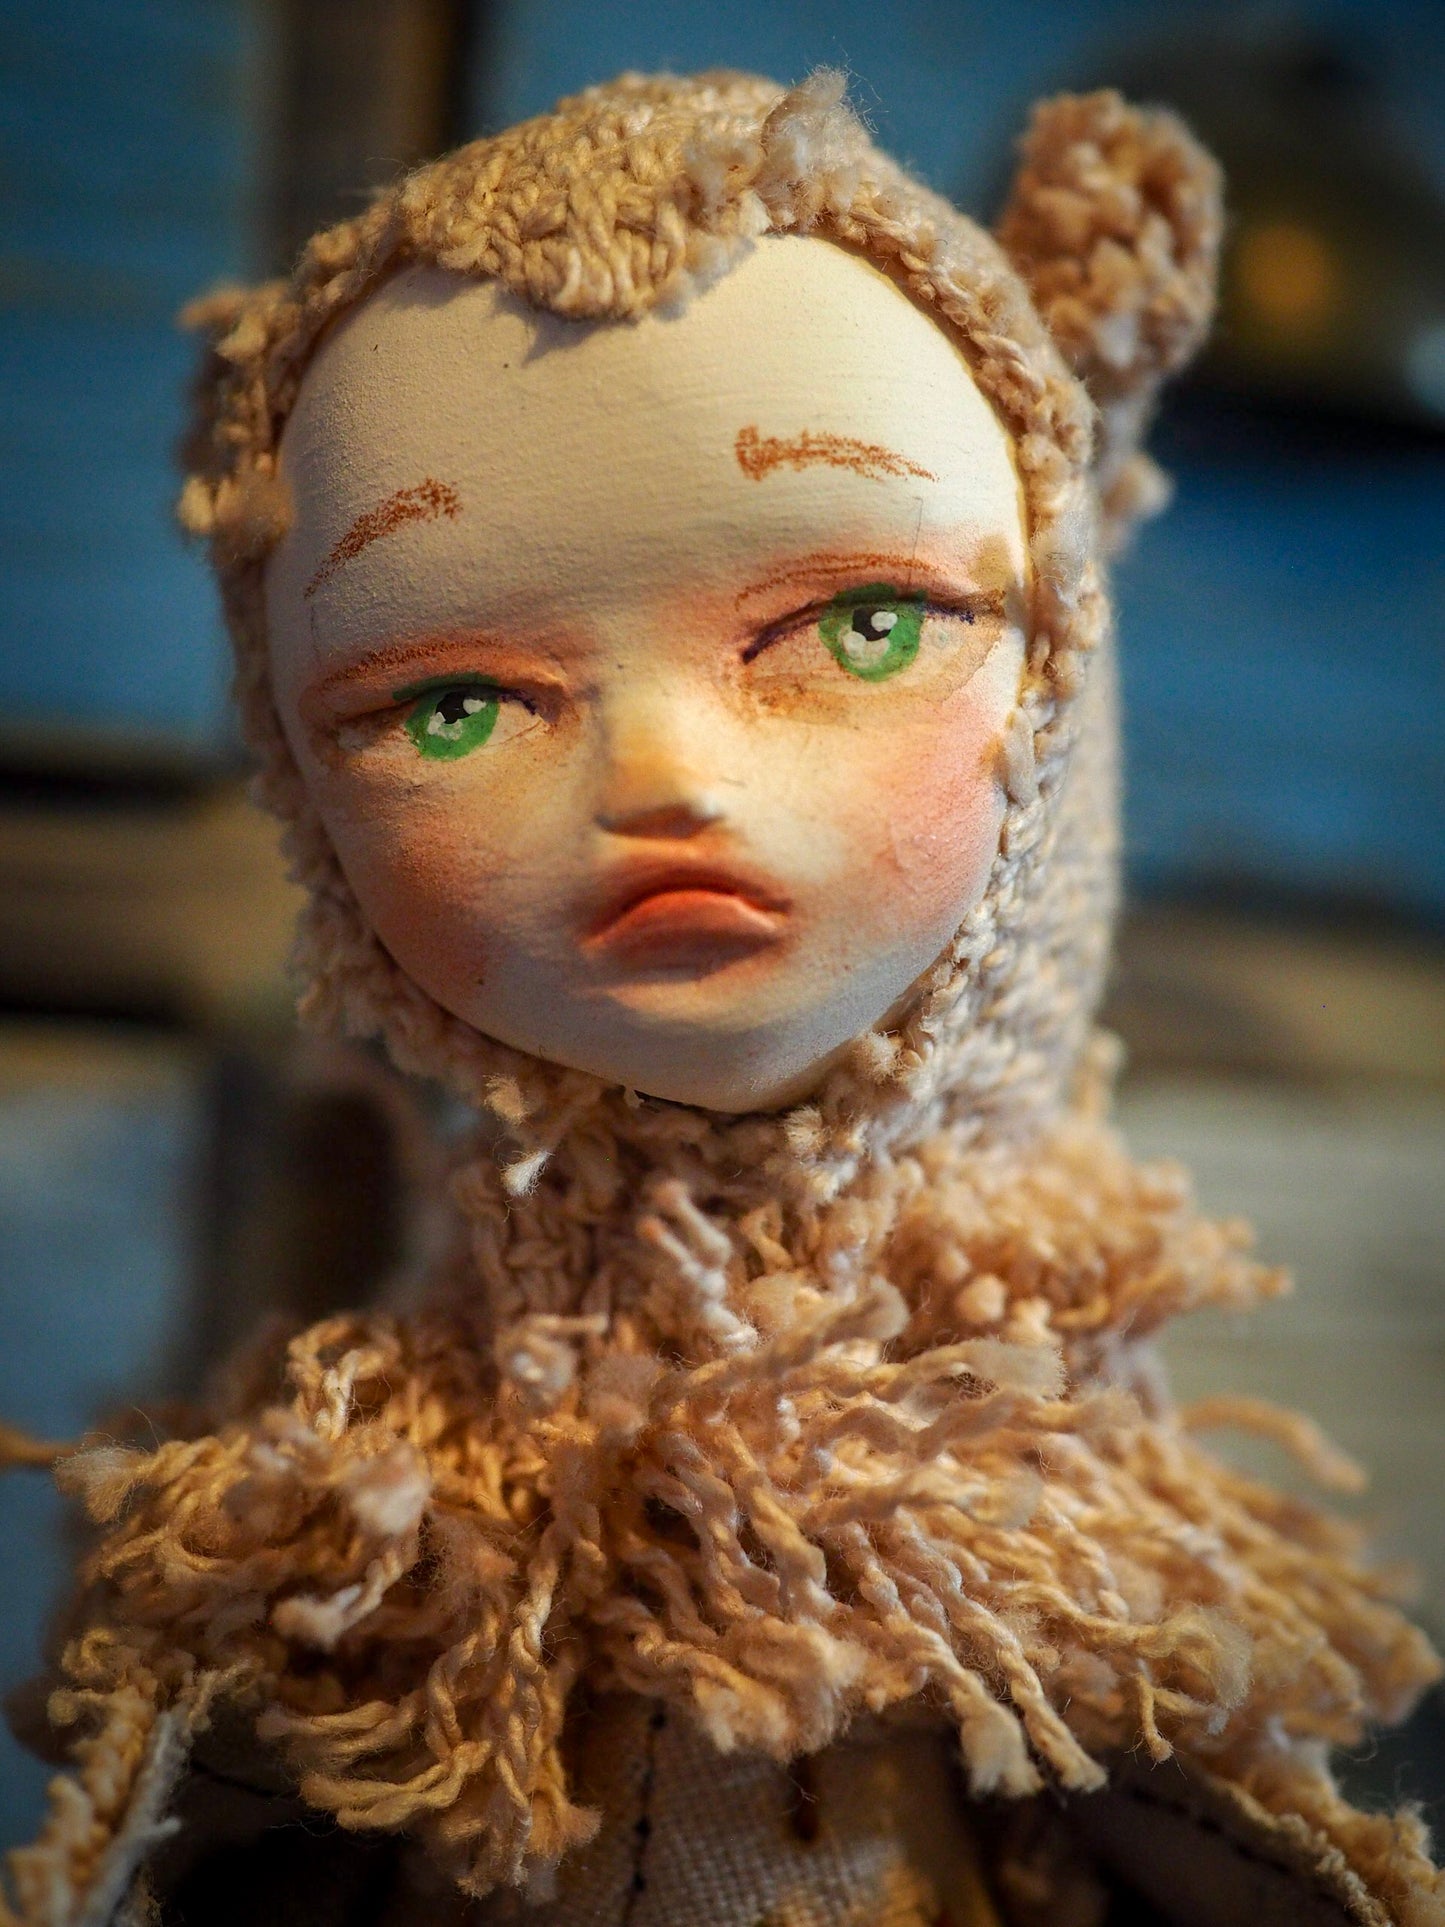 THE OWL - An original handmade doll by Danita Art, made with original patterns, organic fabric dyed using only natural ingredients like avocado peels, walnuts and marigolds. Each mini art doll in this toy collection is a mini work of huggable fabric art to be treasured by any collector of Danita's melancholic and fantastic work.